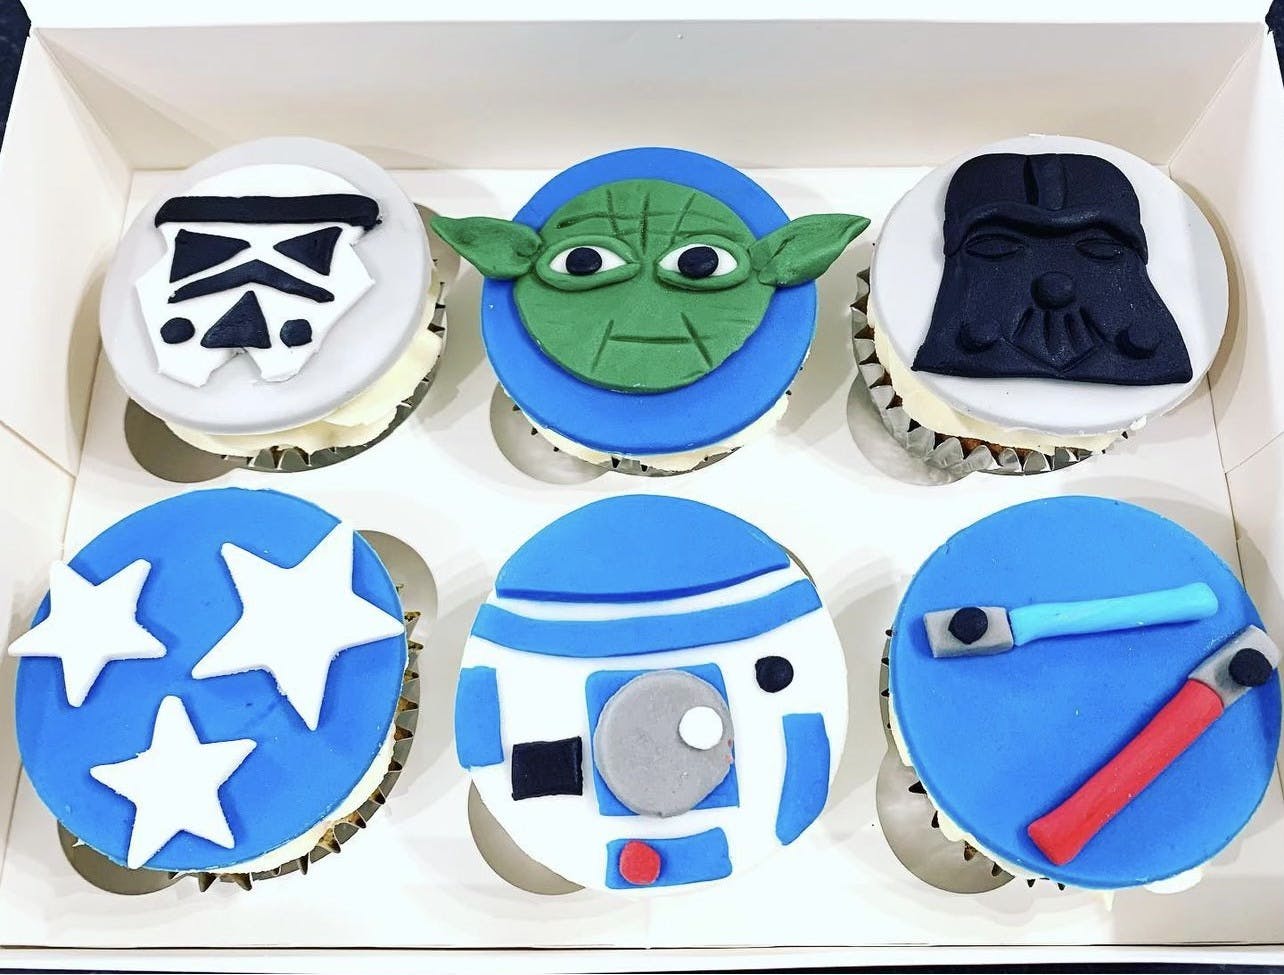 Blue and white cupcakes with a fondant storm trooper, yoda, darth vader, R2-D2 and lightsabers on top